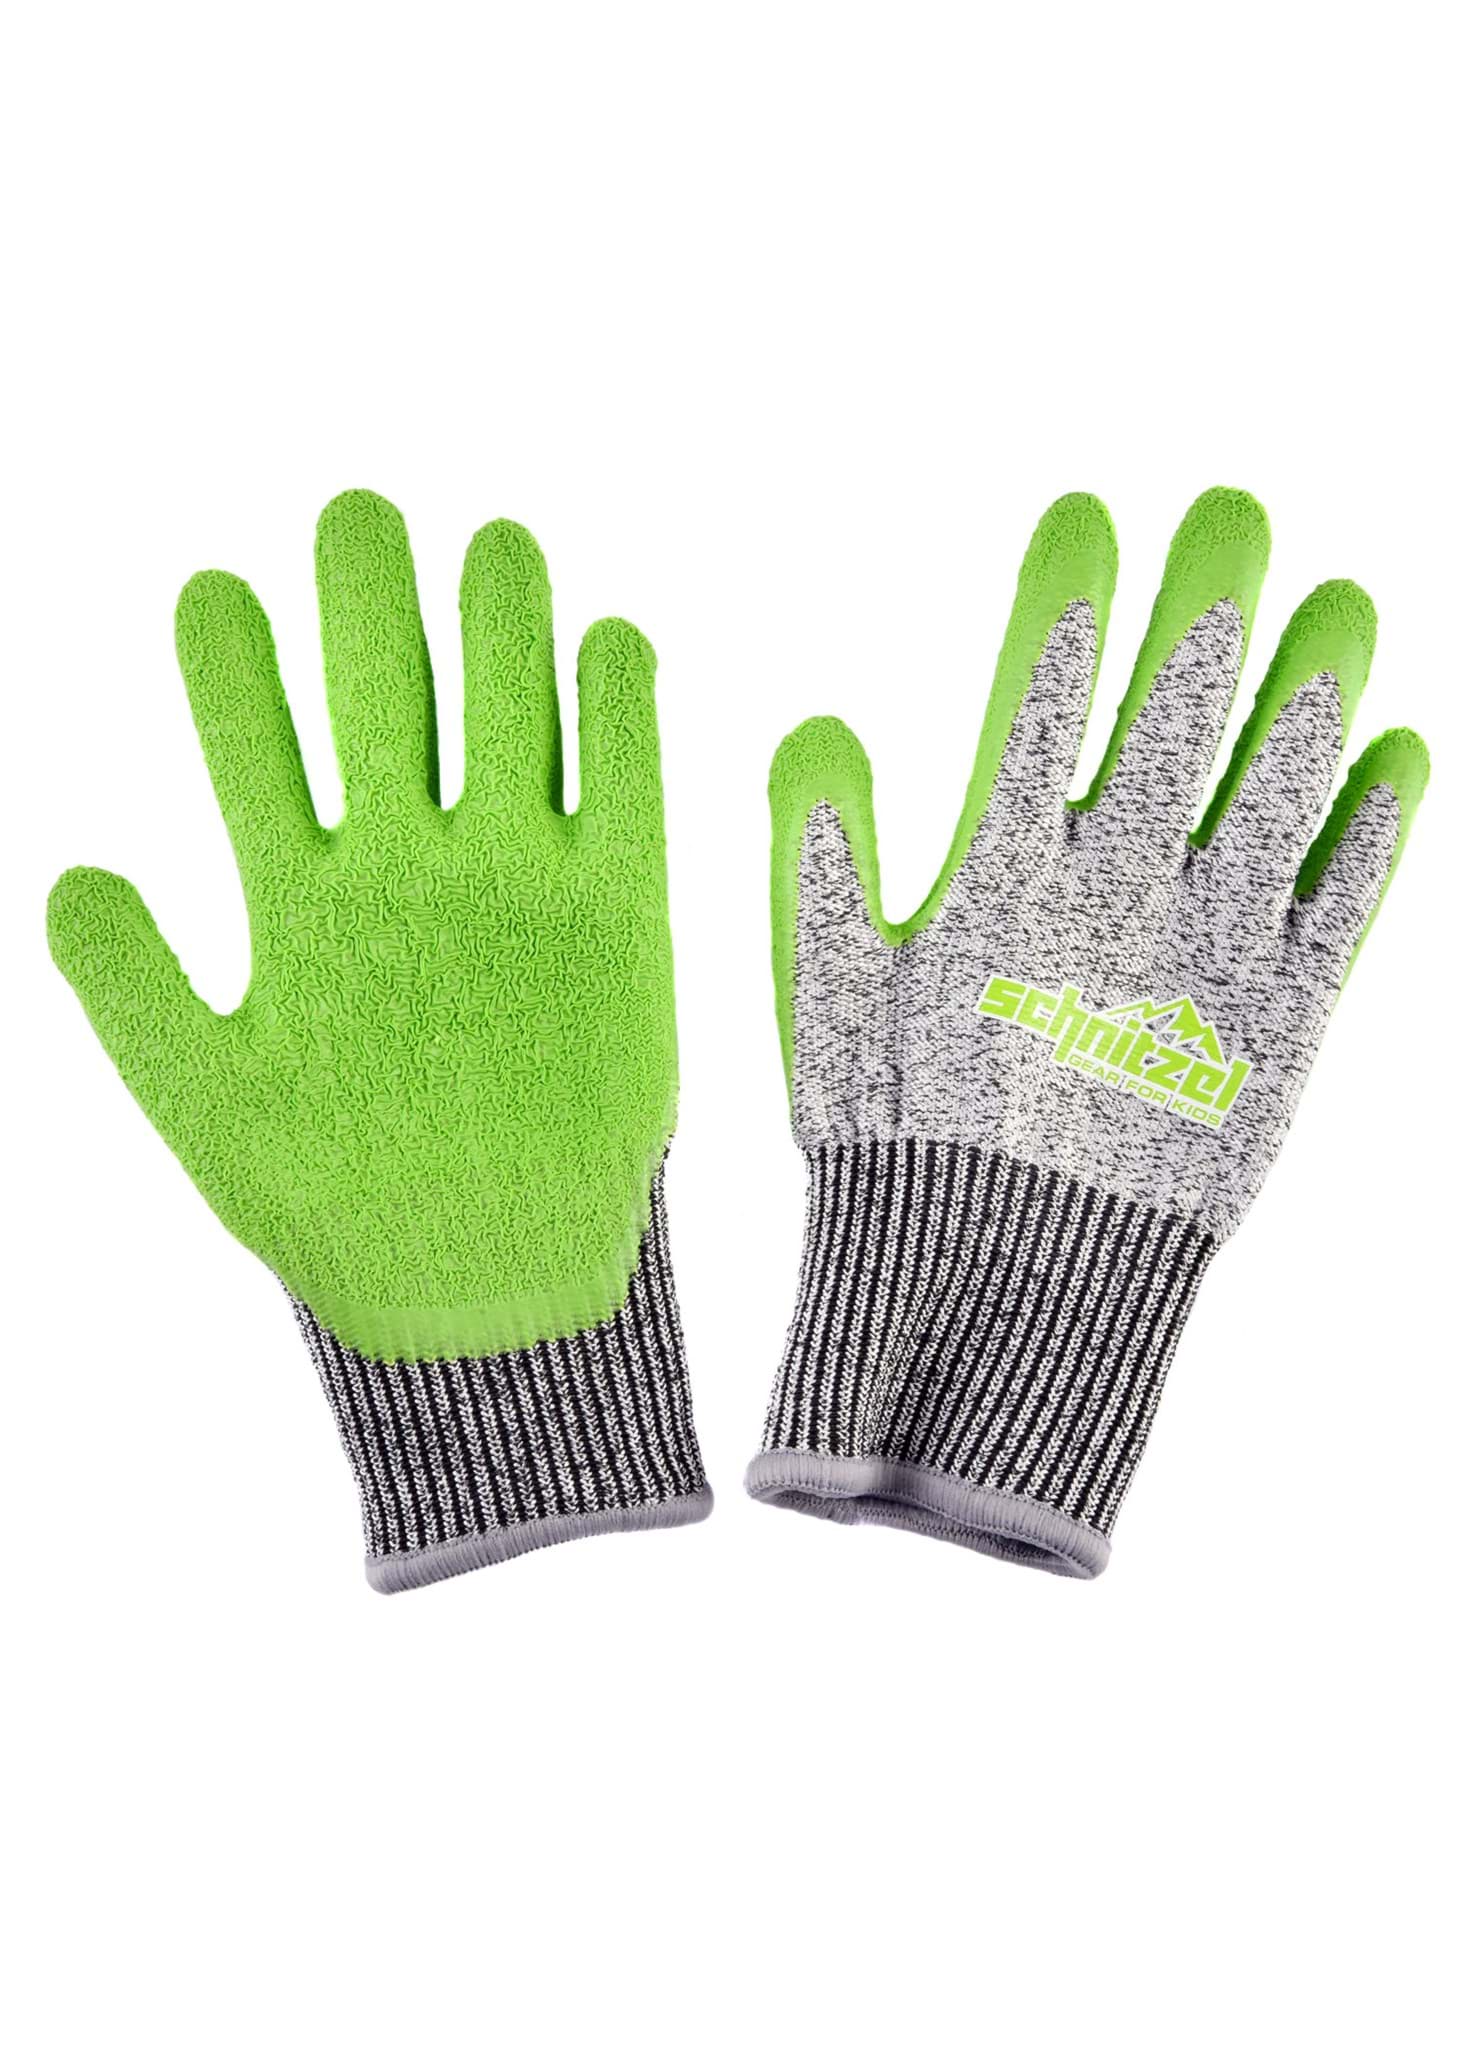 Picture of Schnitzel - Protekto Cut Protection Gloves for Kids Size 5